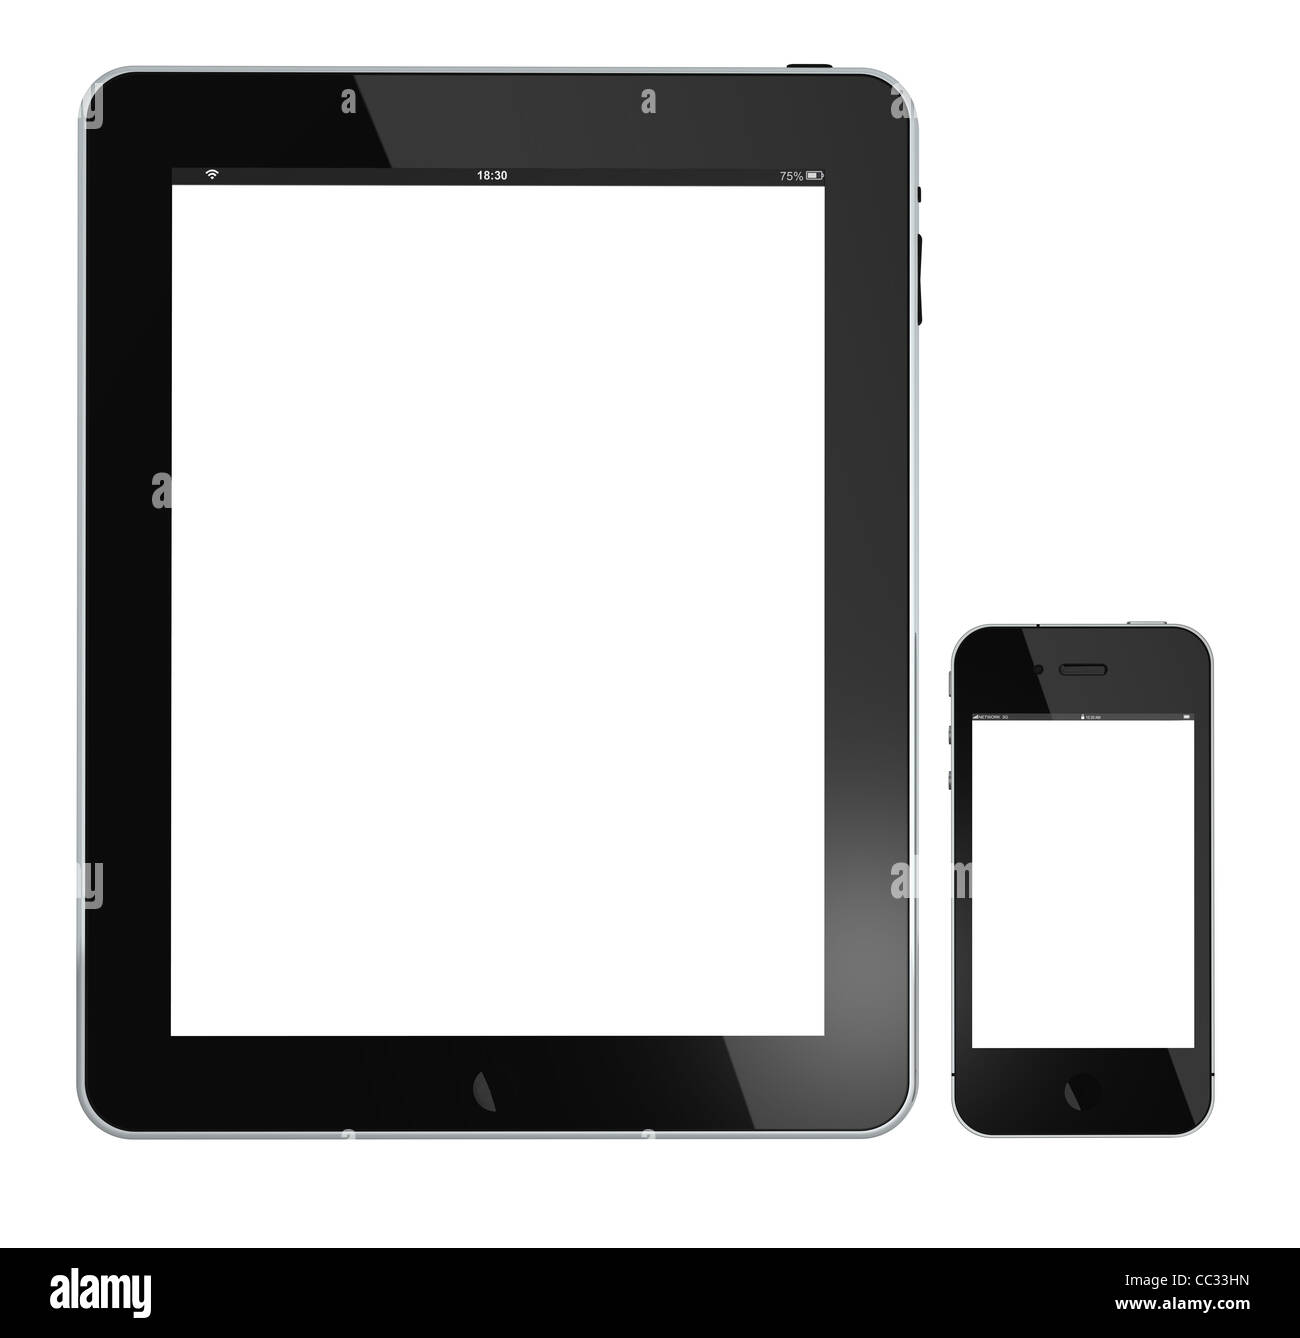 New Apple iPad portable computer tablet and iphone 4g Stock Photo